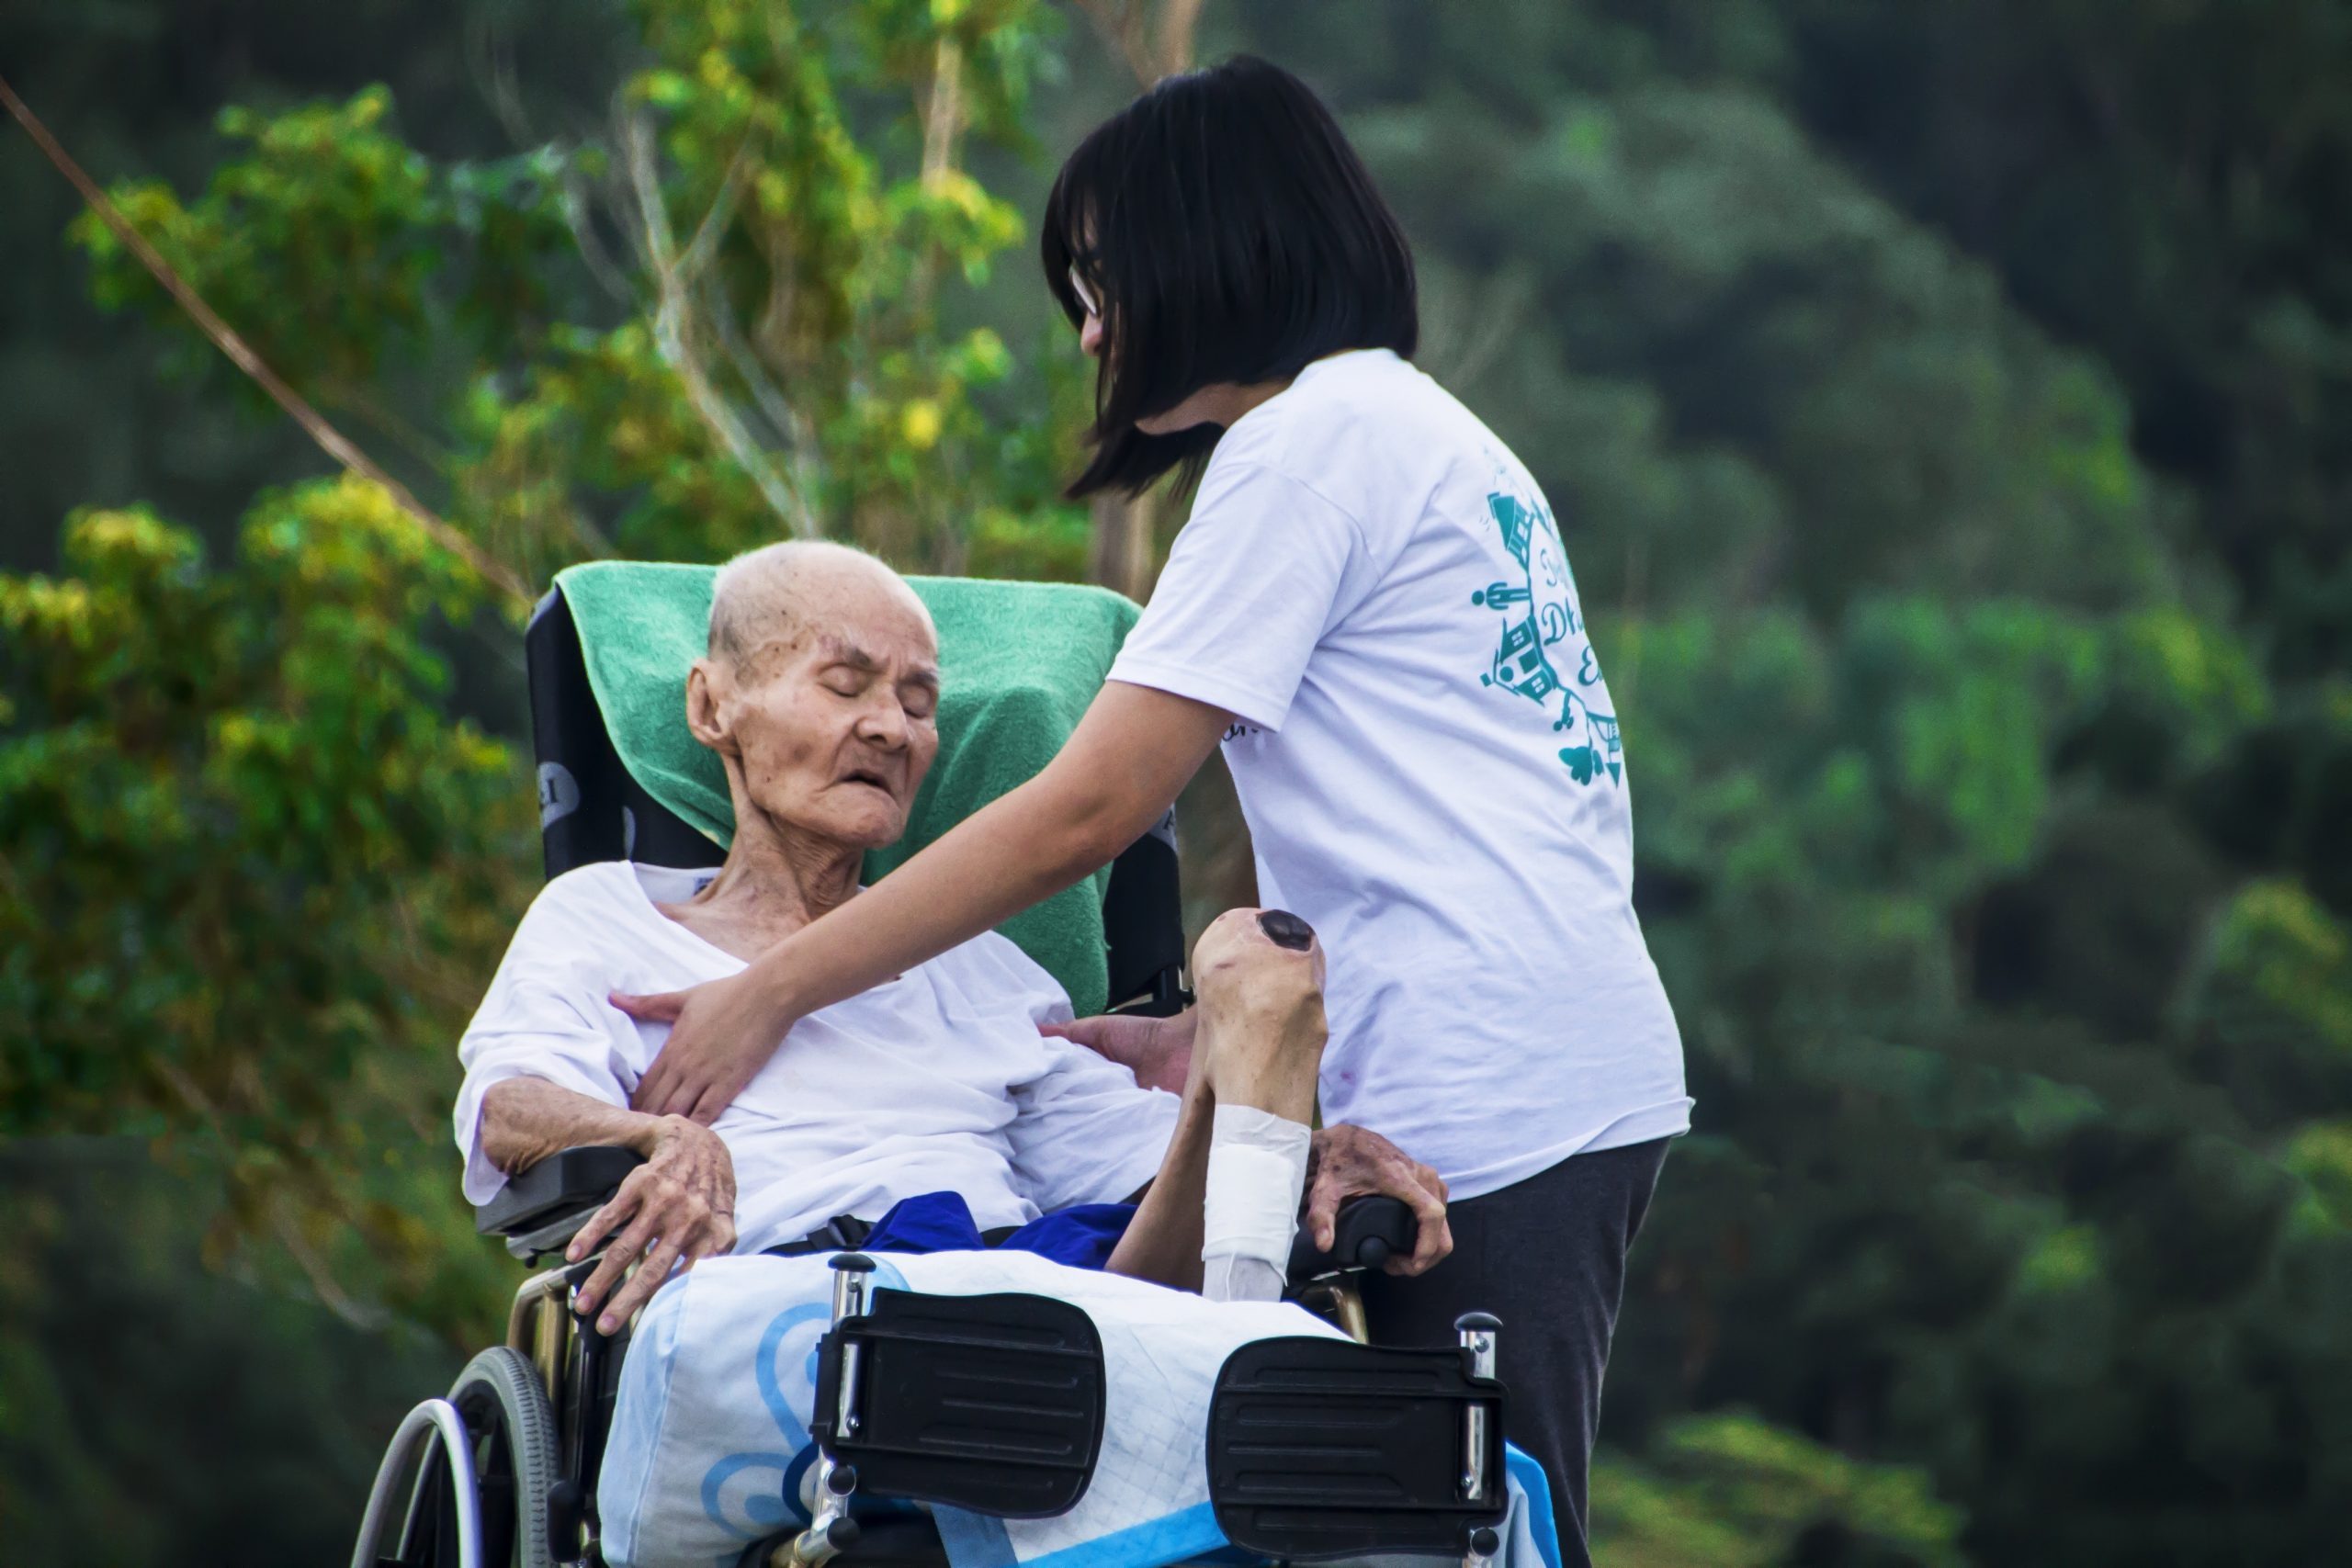 An elderly frail gentleman on a wheelchair with physical limitations is being taken care of by someone who could be a family member or a paid caregiver. You cannot tell...